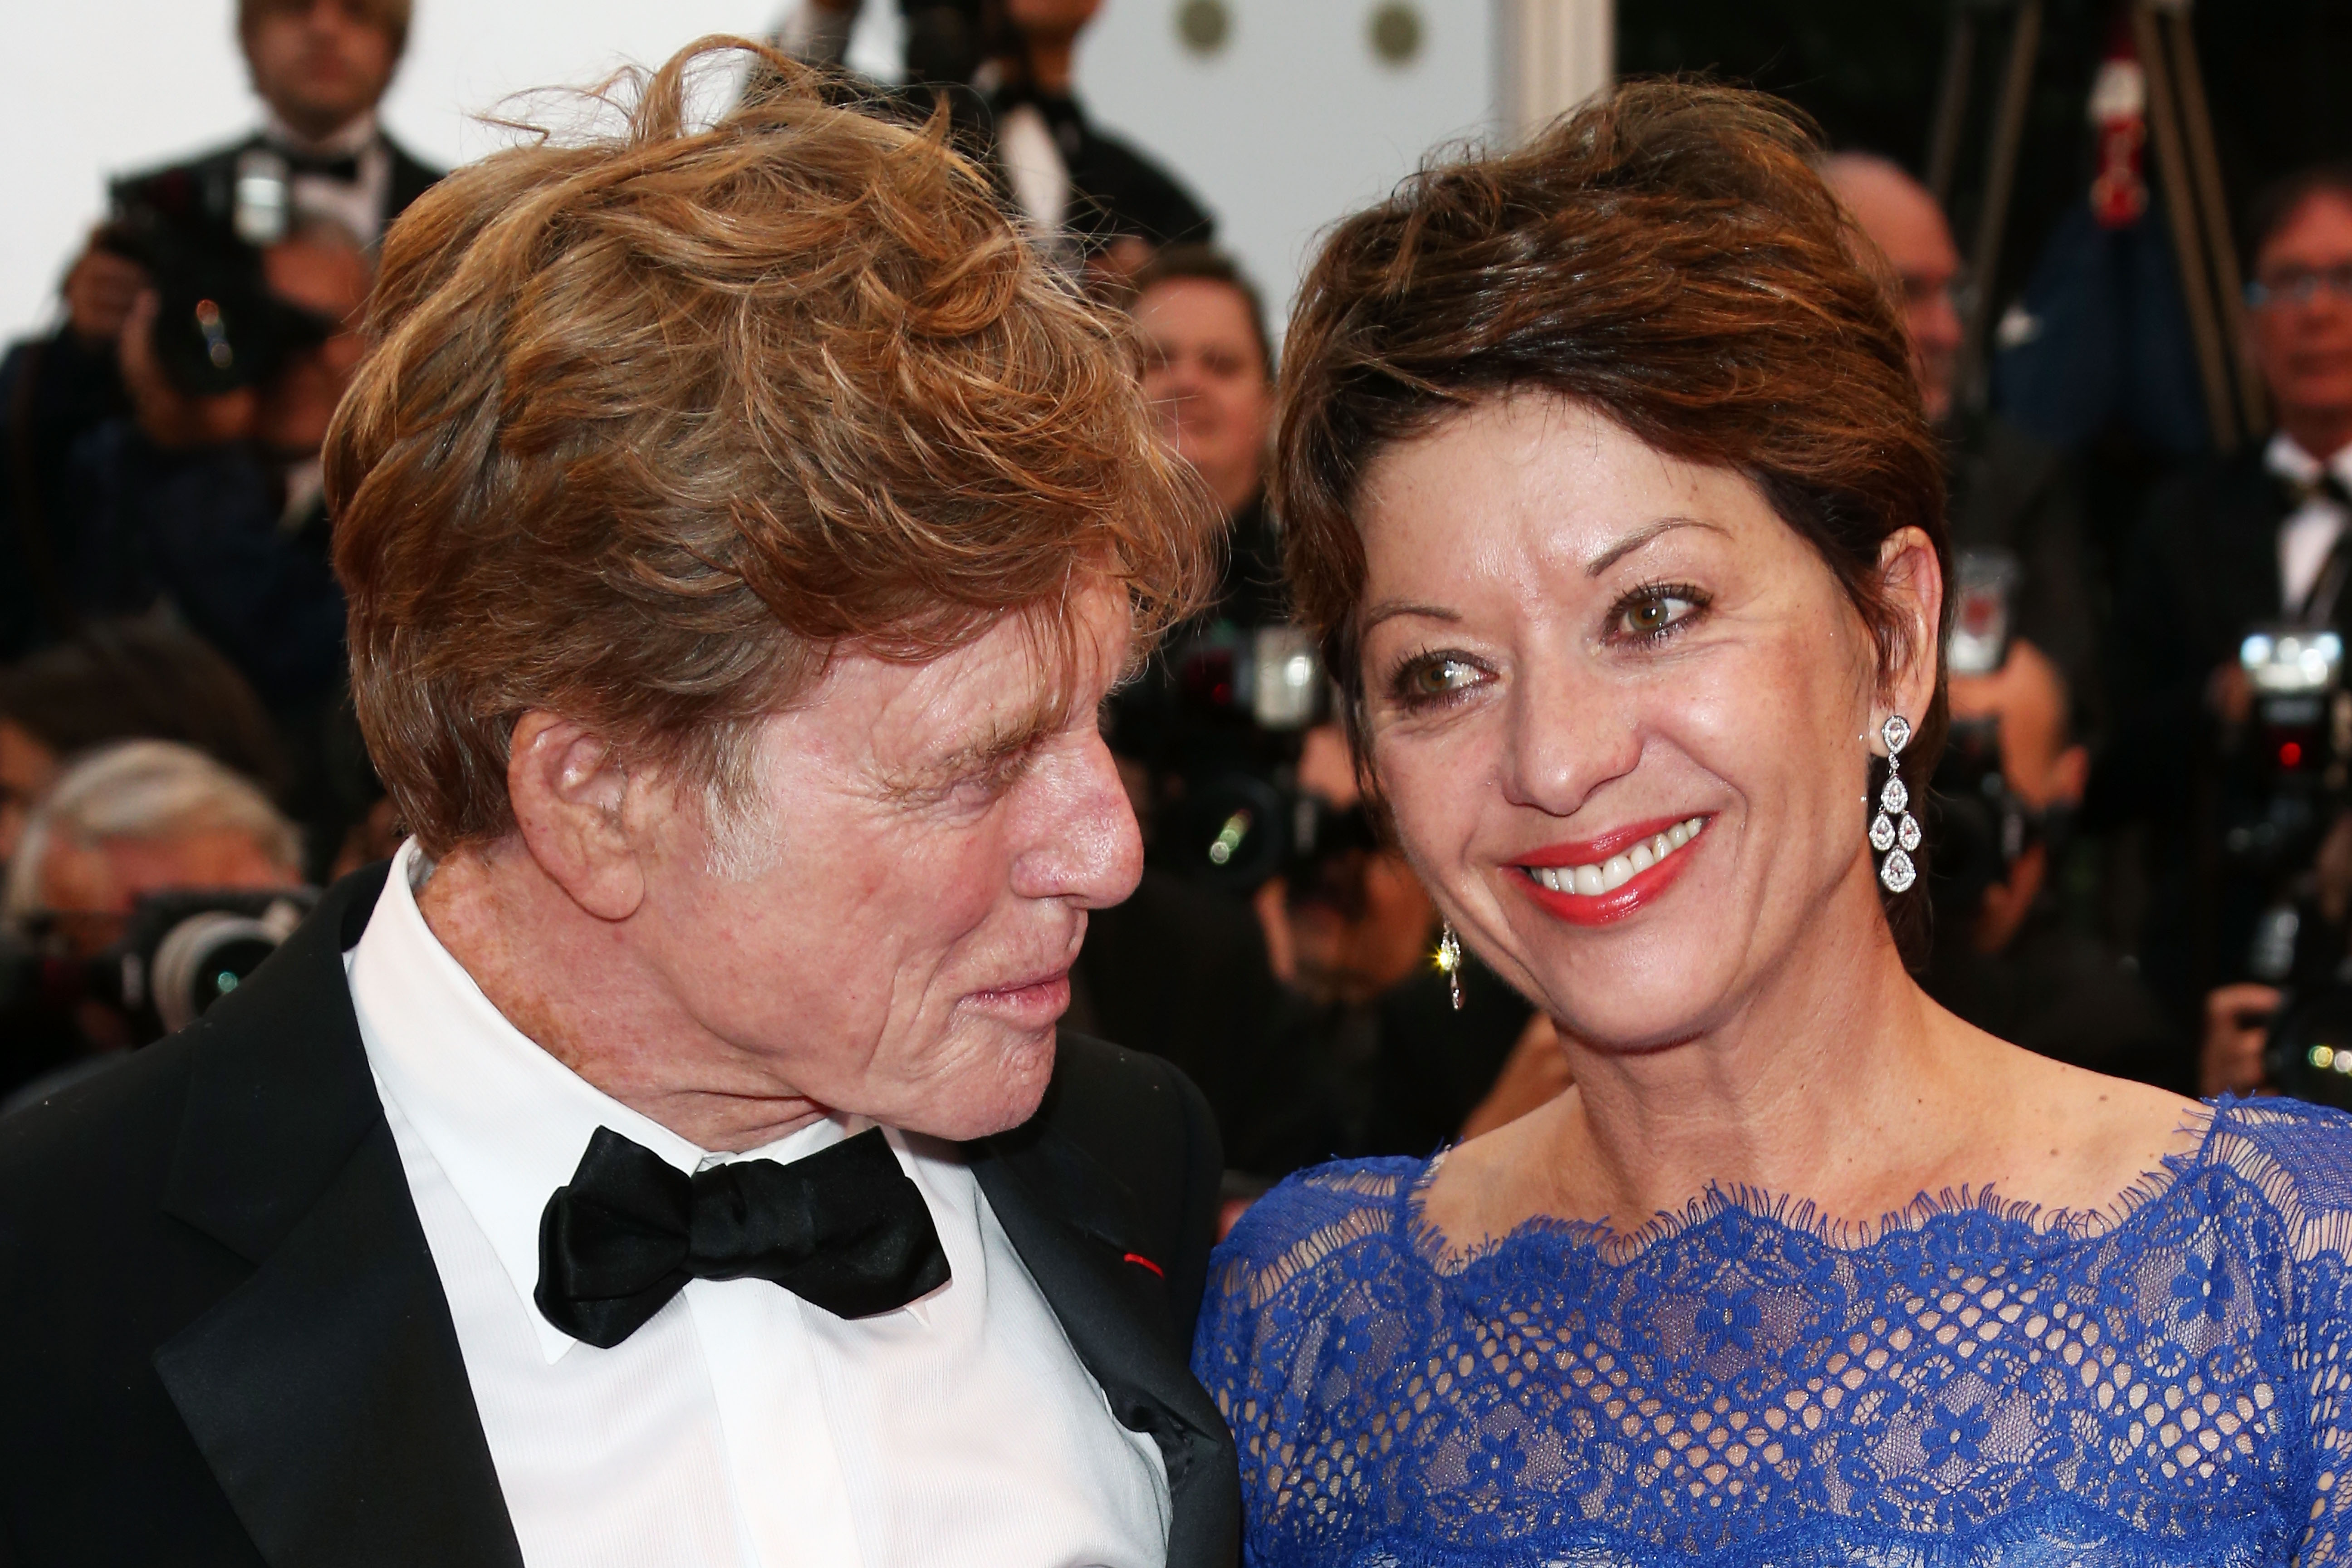 Robert Redford and Sibylle Szaggars in Cannes, France on May 22, 2013 | Source: Getty Images 